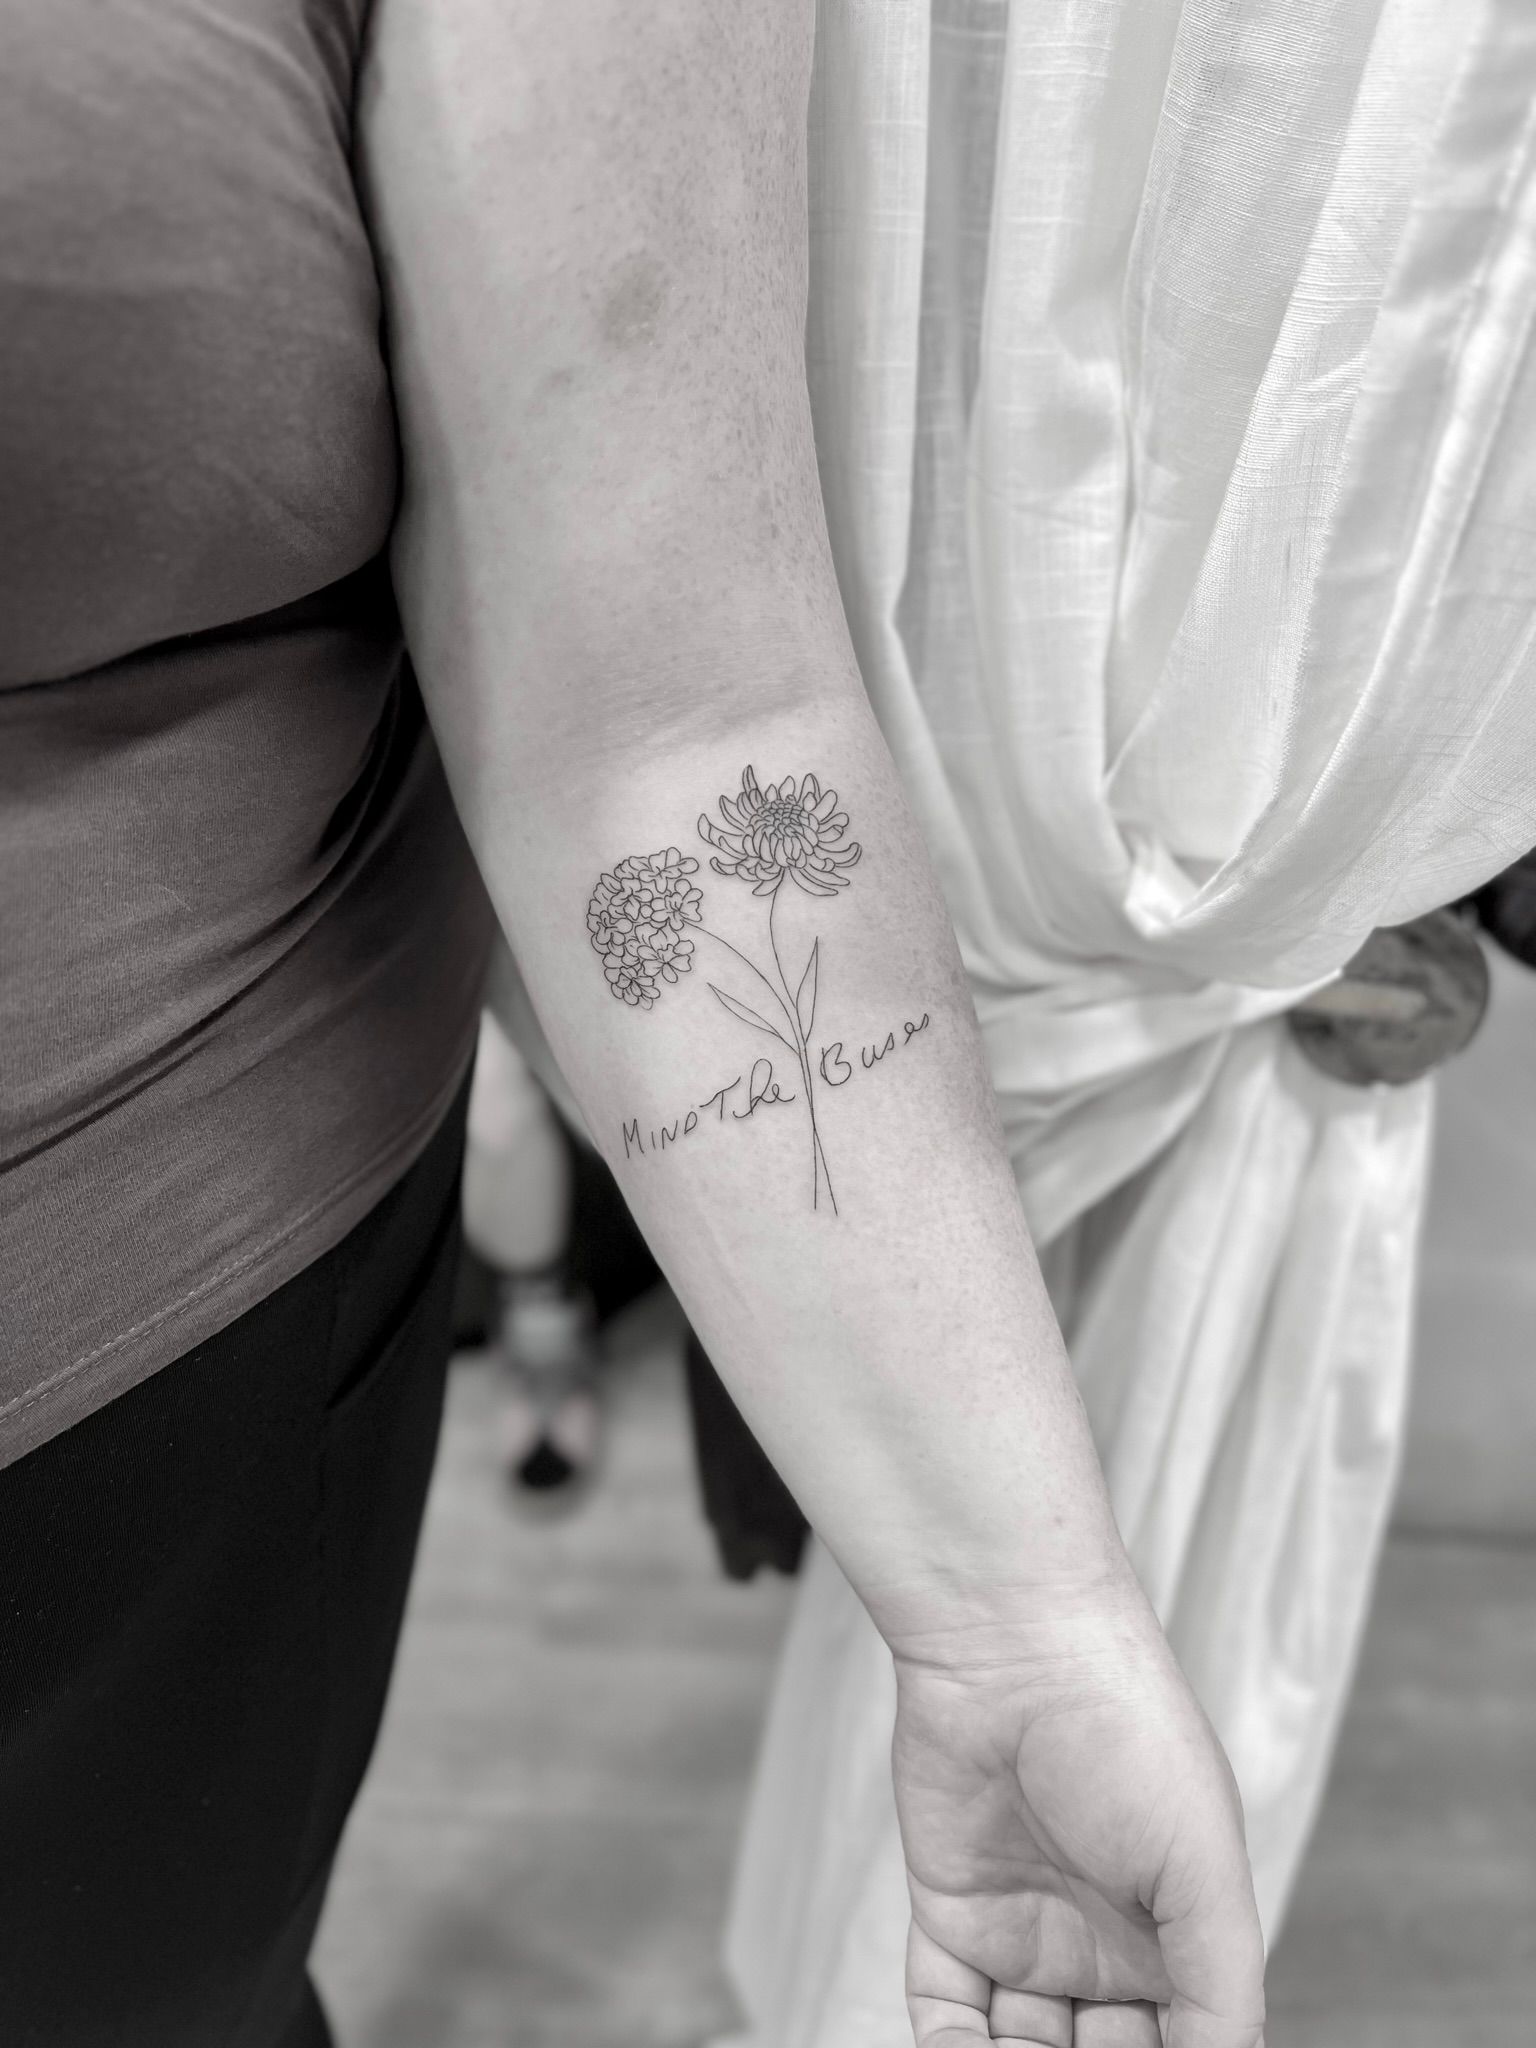 Express Yourself With Chrysanthemum Tattoo: 50 Best Designs — InkMatch